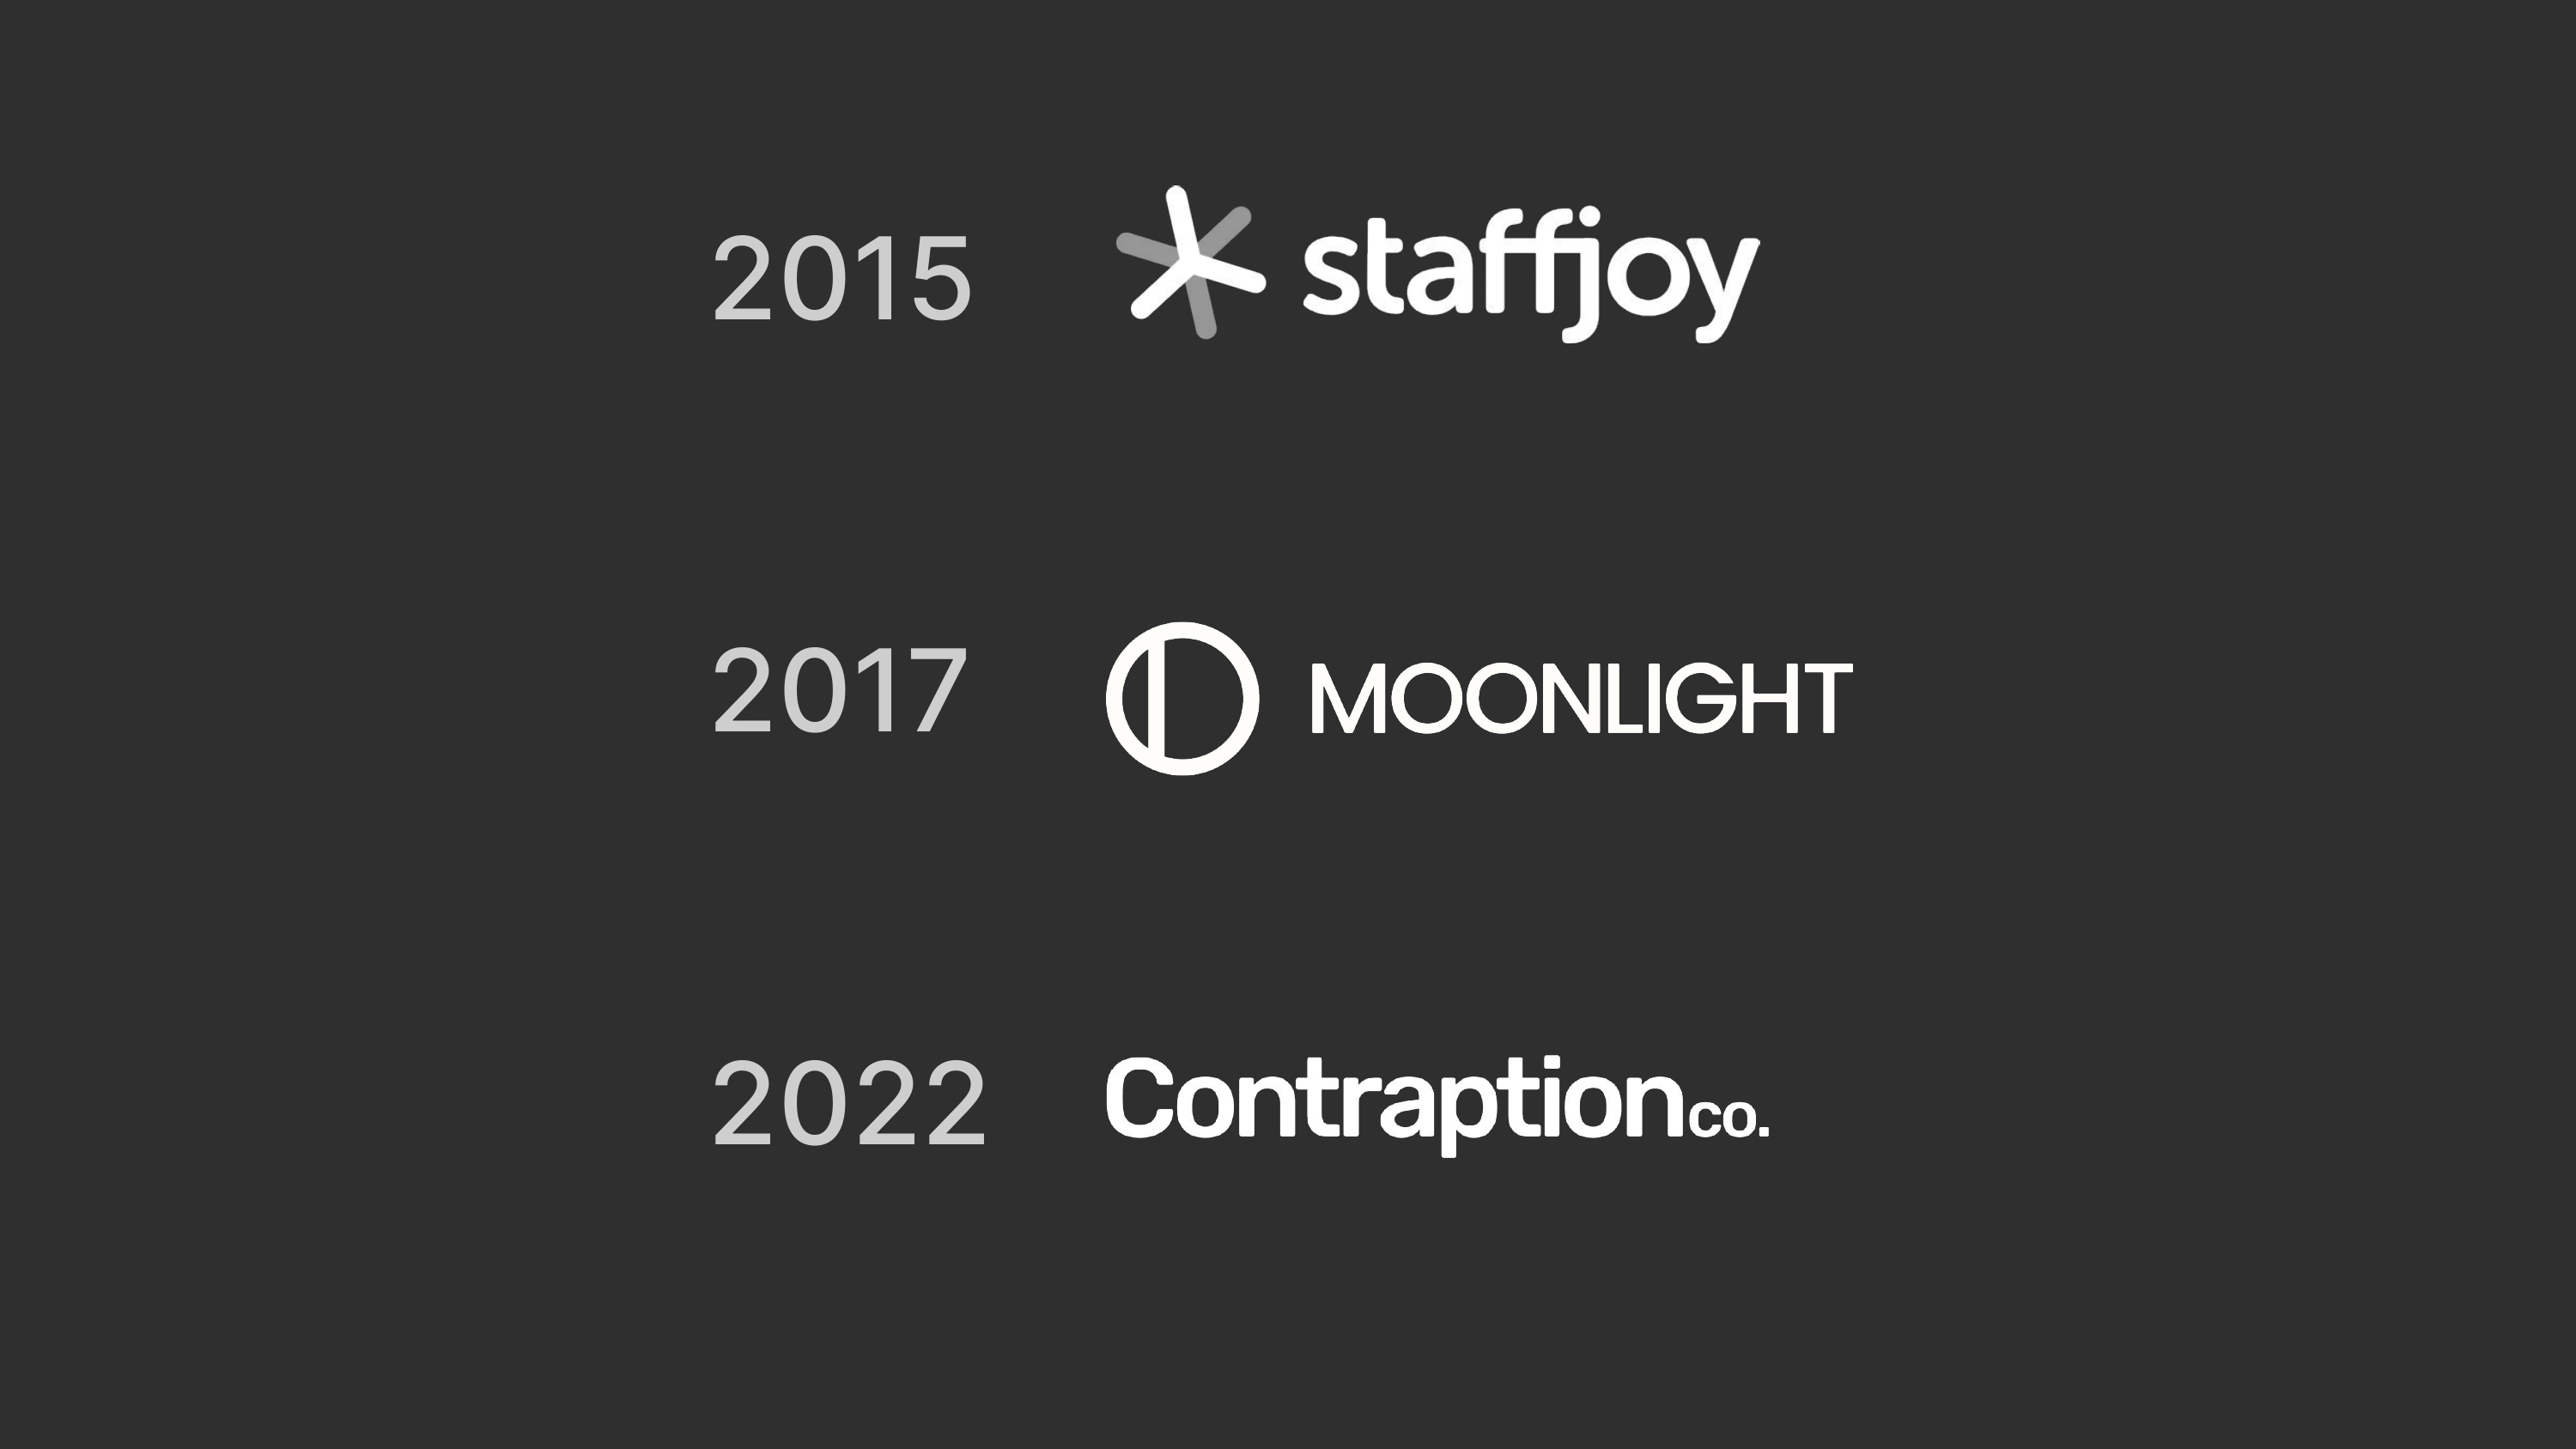 In the past I founded Staffjoy and Moonlight, and now I run Contraption Company.